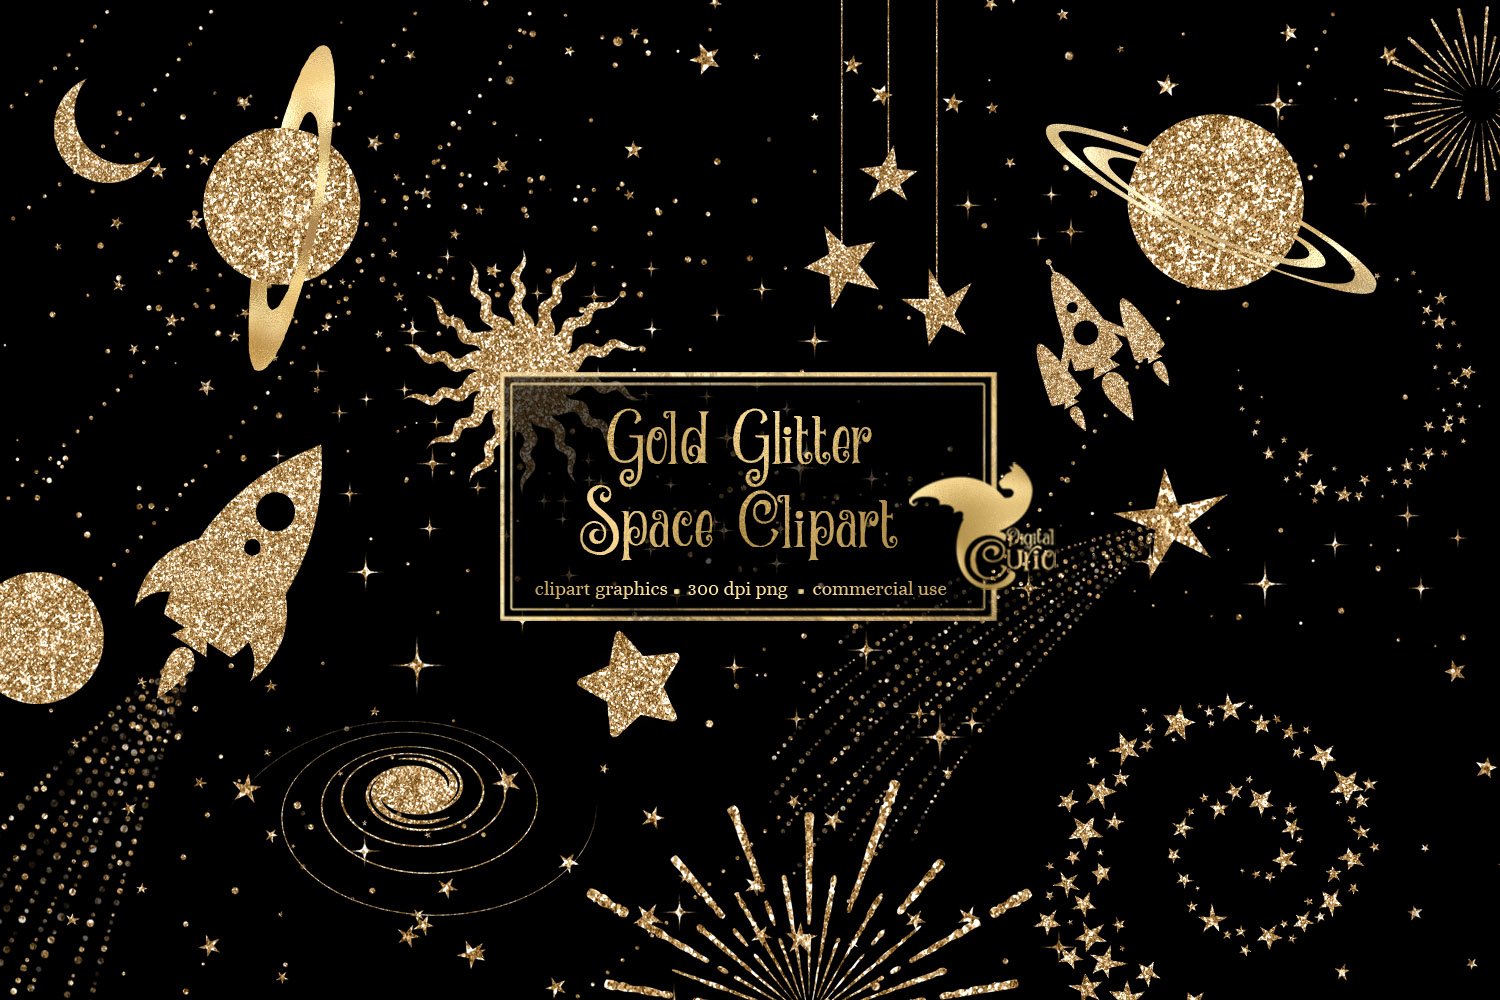 Gold Glitter Space Clipart cover image.